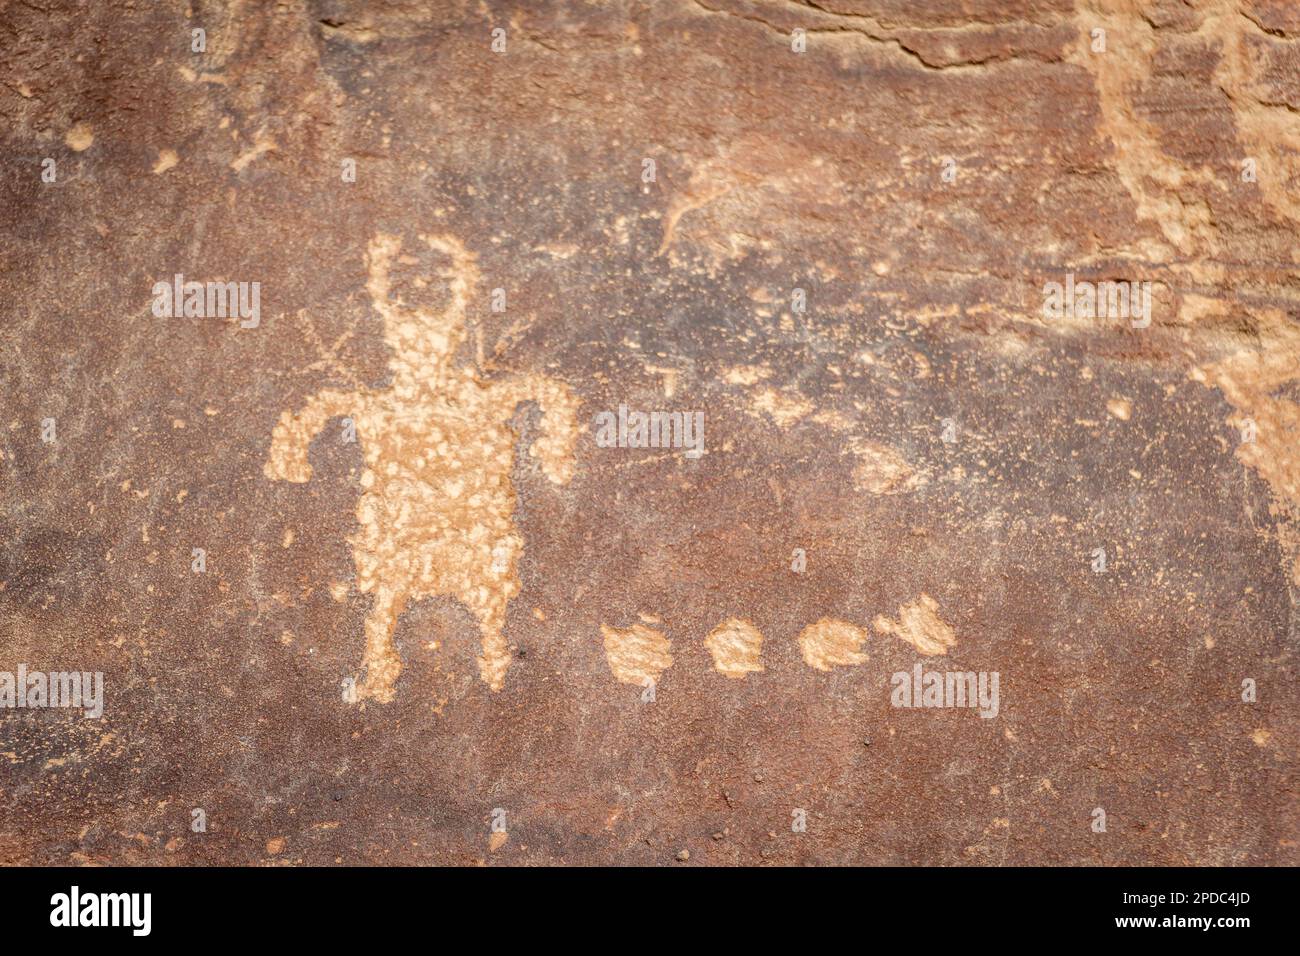 Petroglyph of person with horns rock drawing on sandstone in Price, Utah Stock Photo